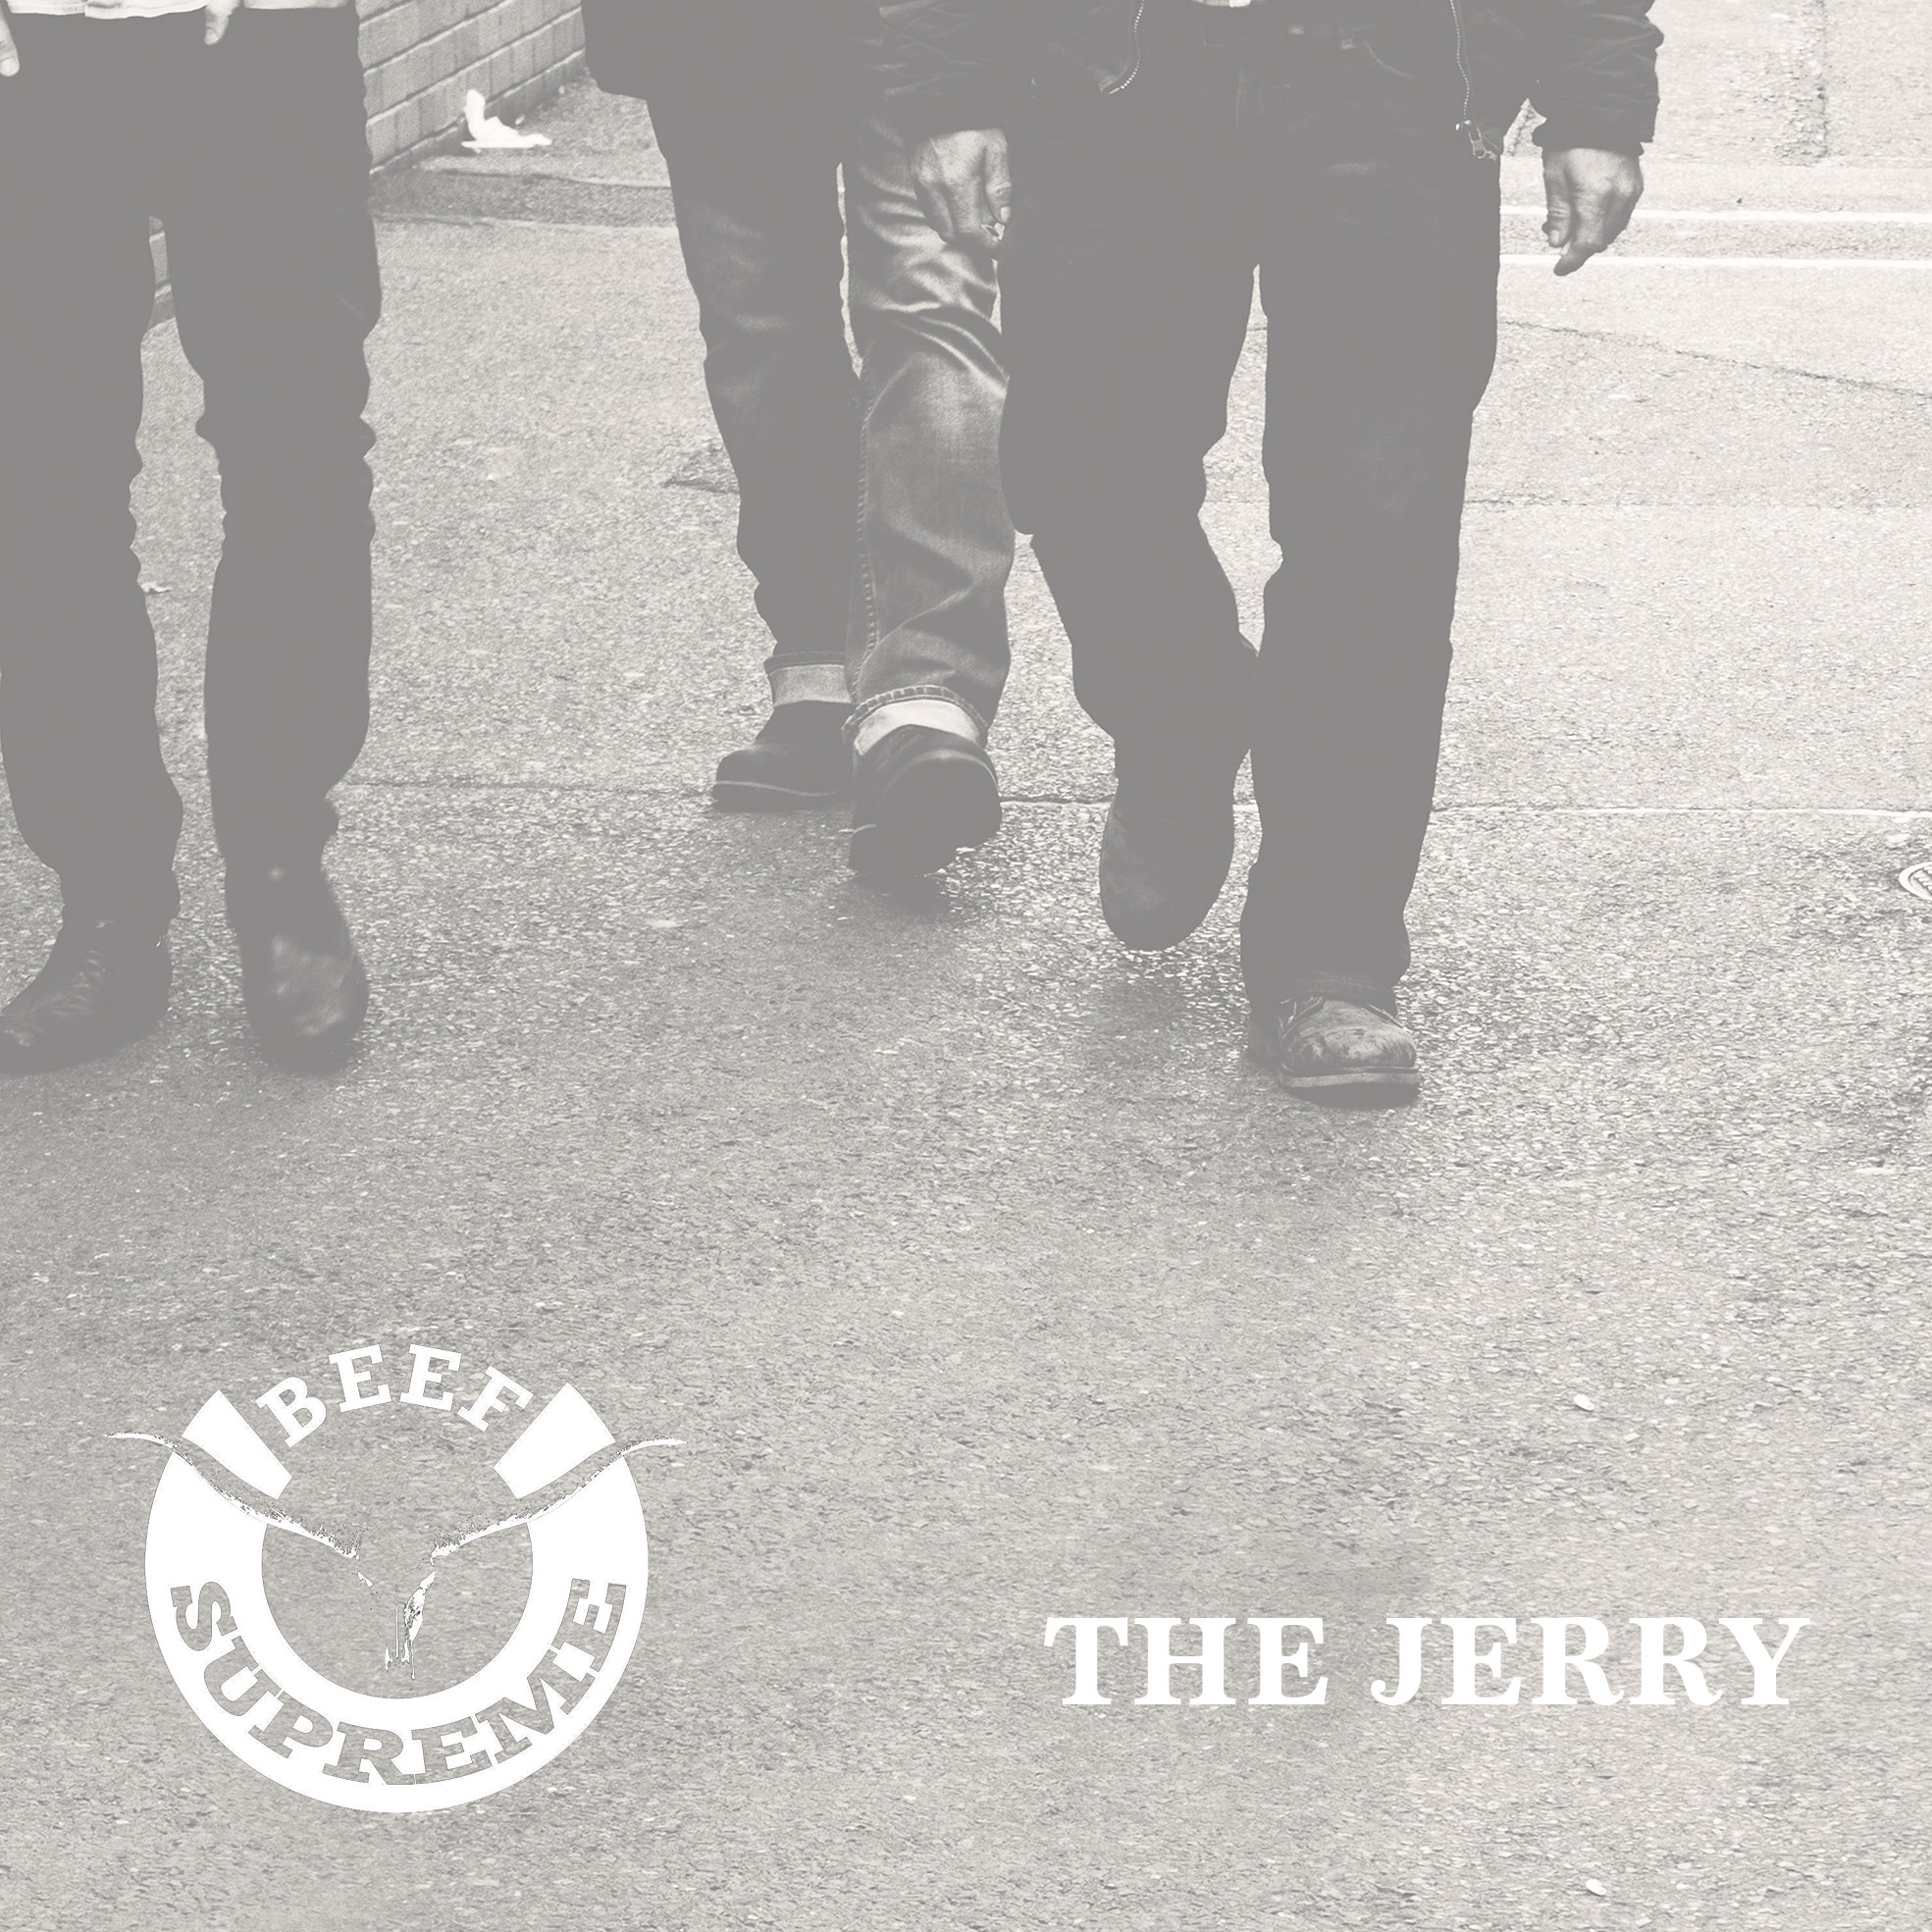 Download The Jerry